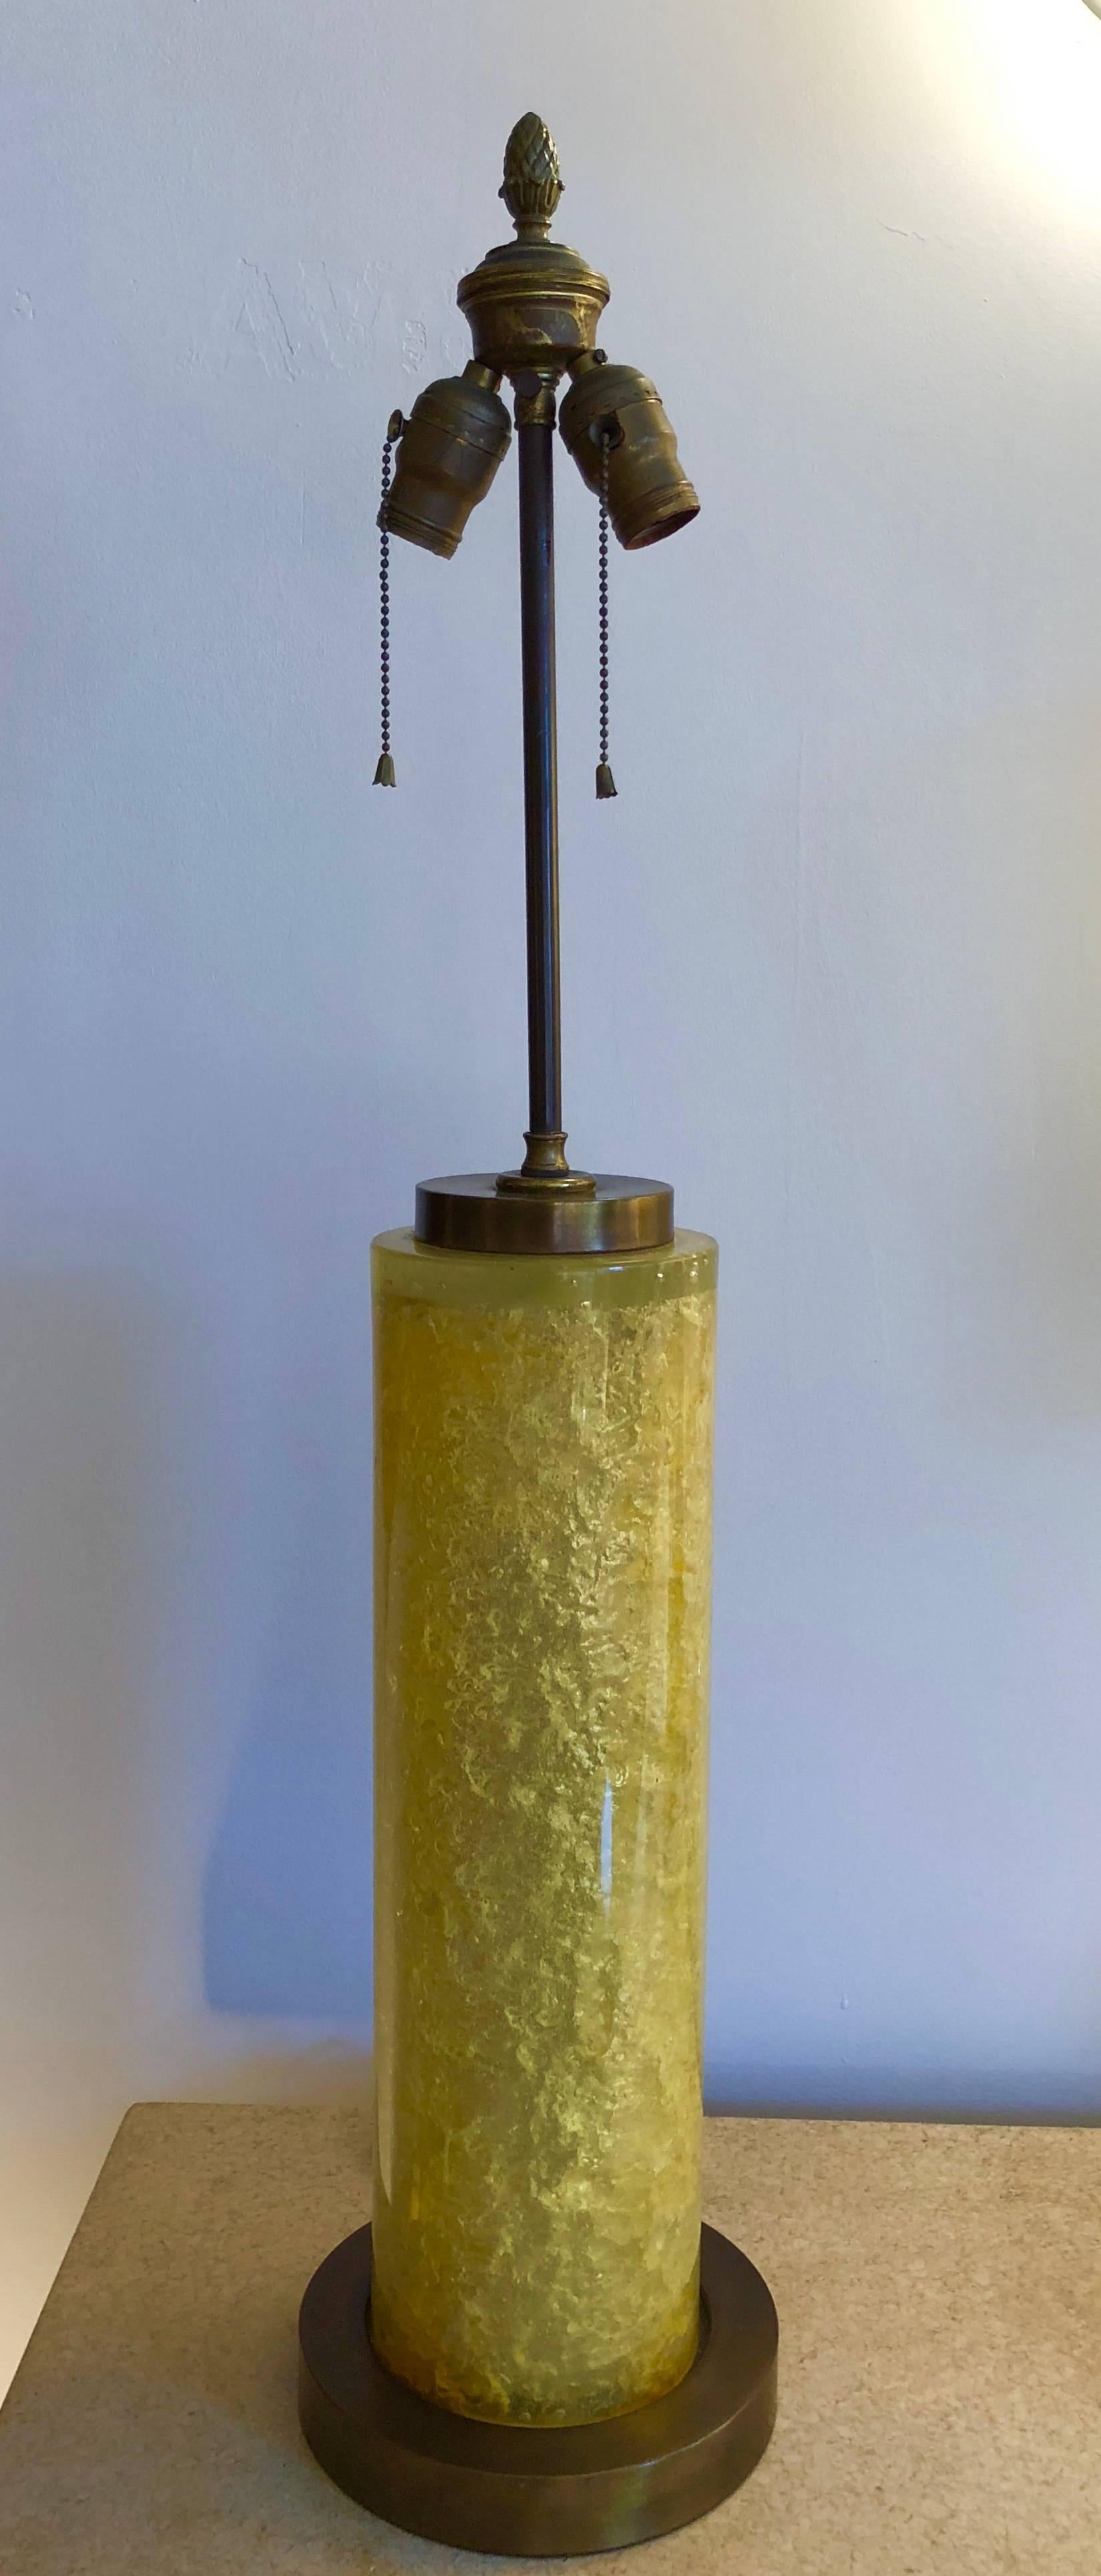 Yellow fractal resin lamp with architectural bronze stand and mounts and double cluster socket. Resin 1s 18